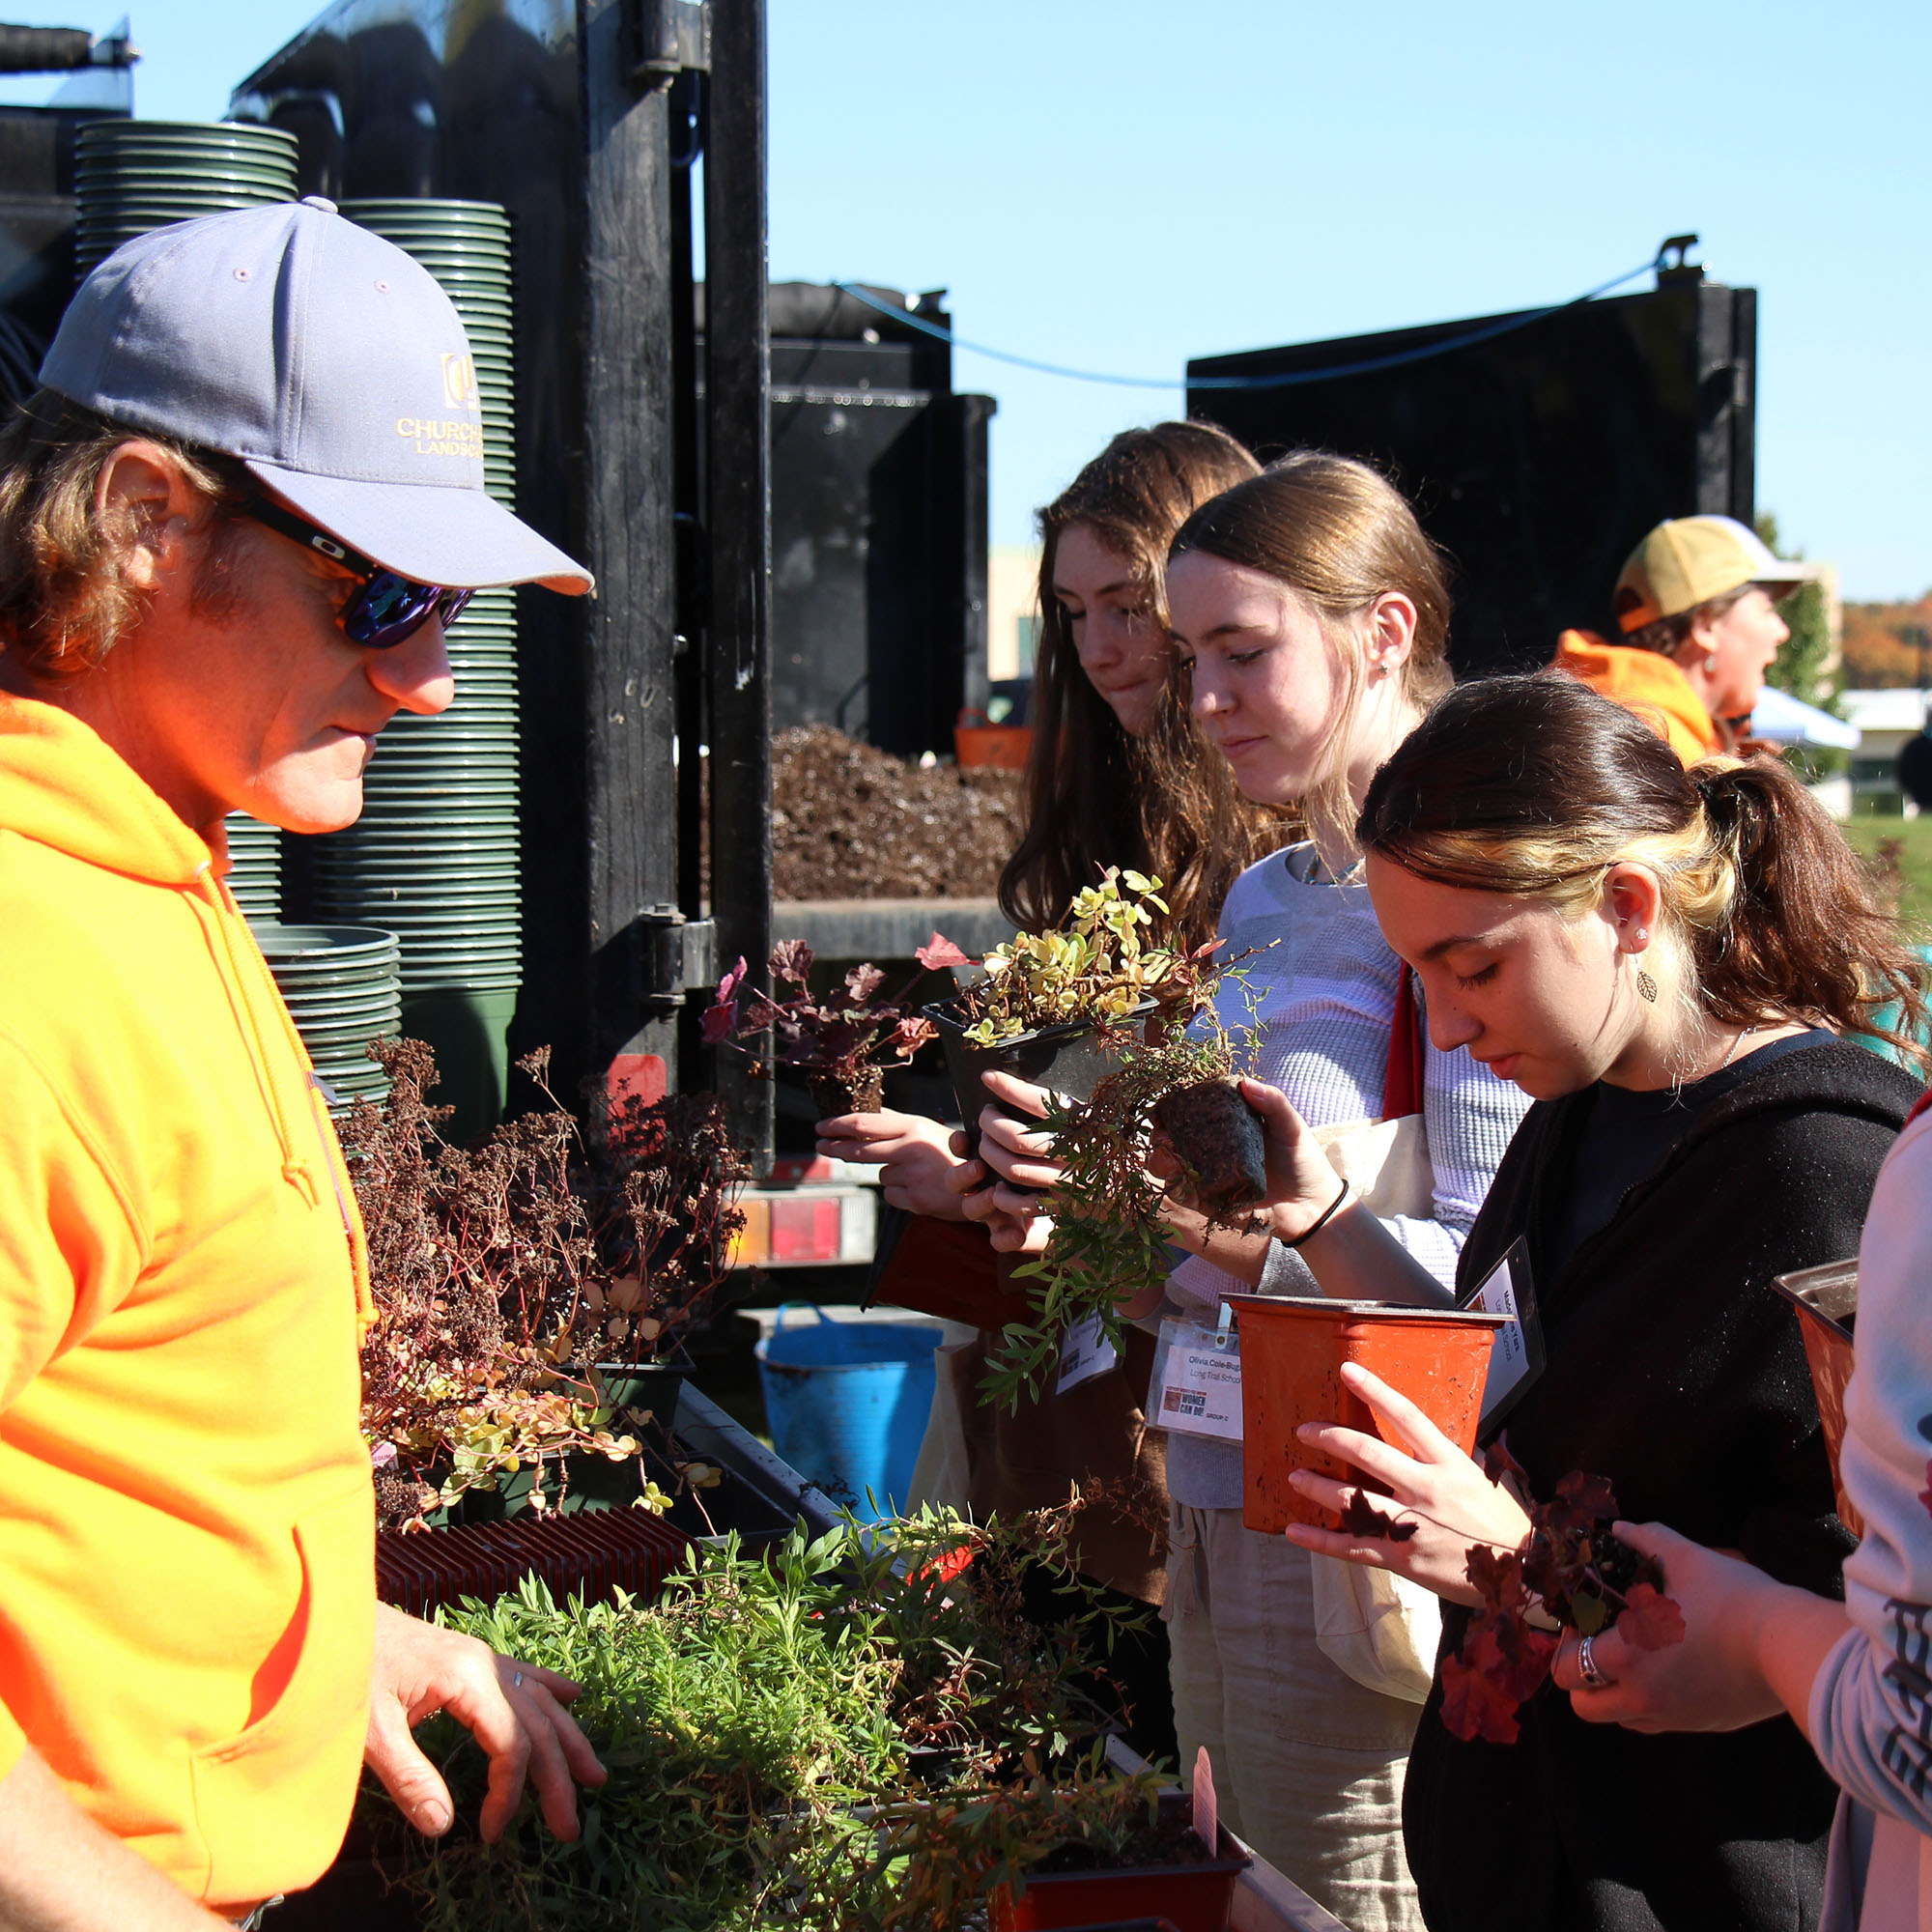 A group of high school girls put plants into pots. Schools, businesses, and volunteers come together to provide an impactful experience for more than 250 students at the conference.